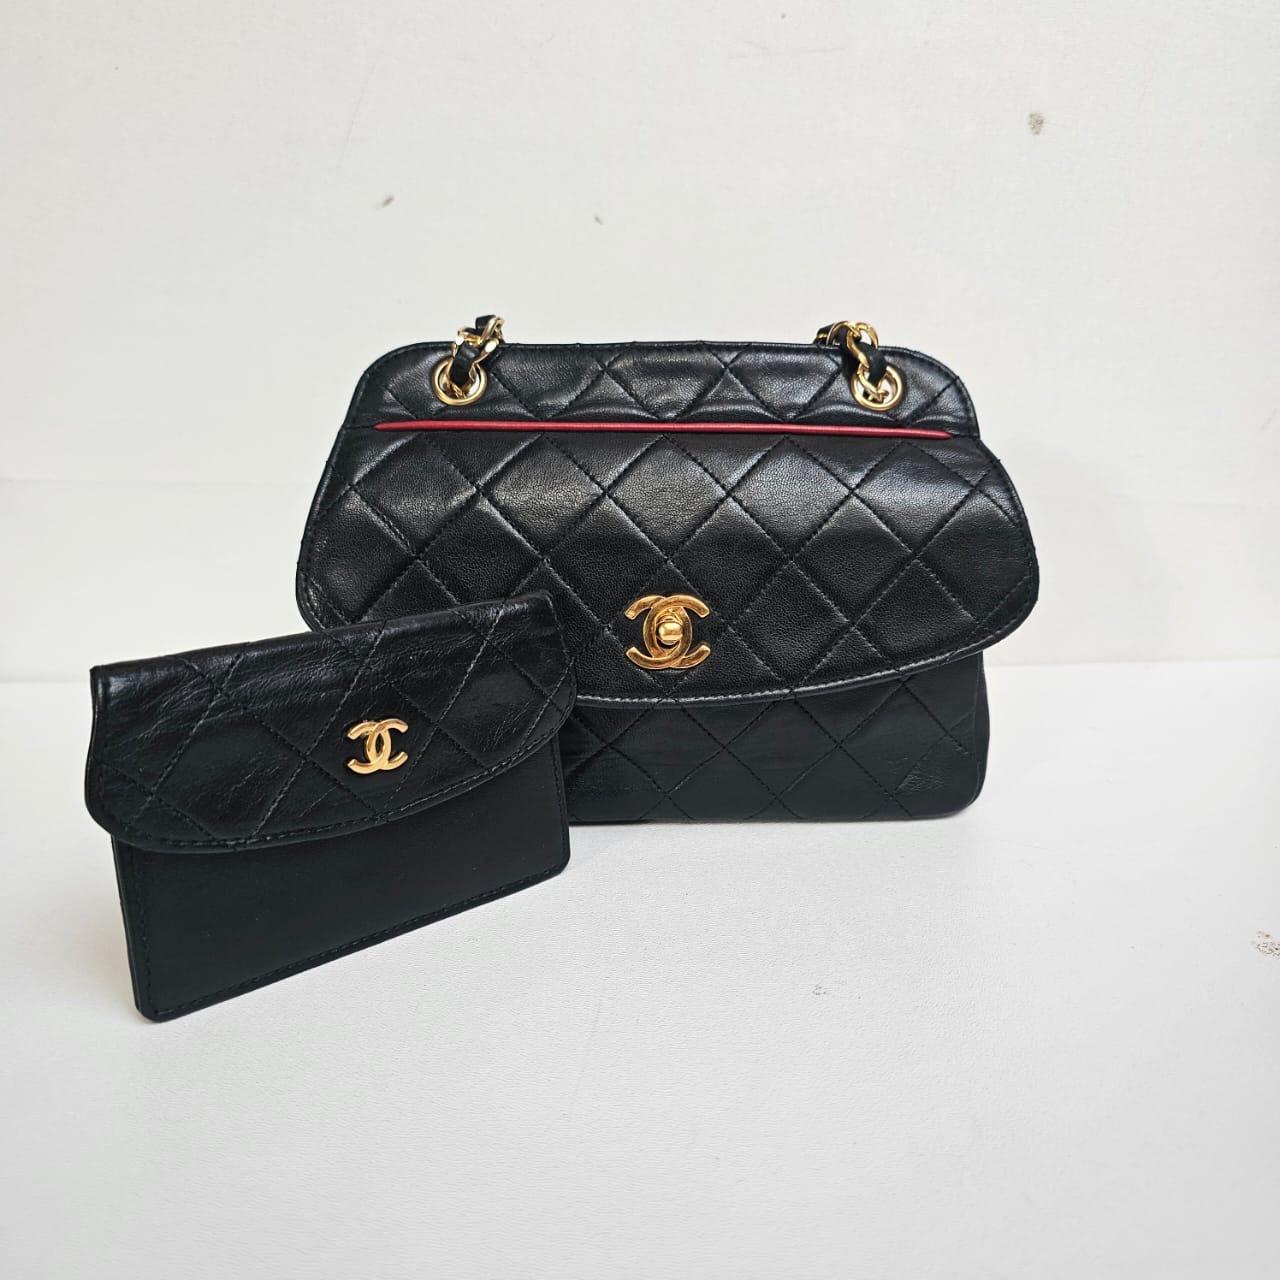 Vintage Chanel Black Lambskin Quilted Mini Flap Bag For Sale 8